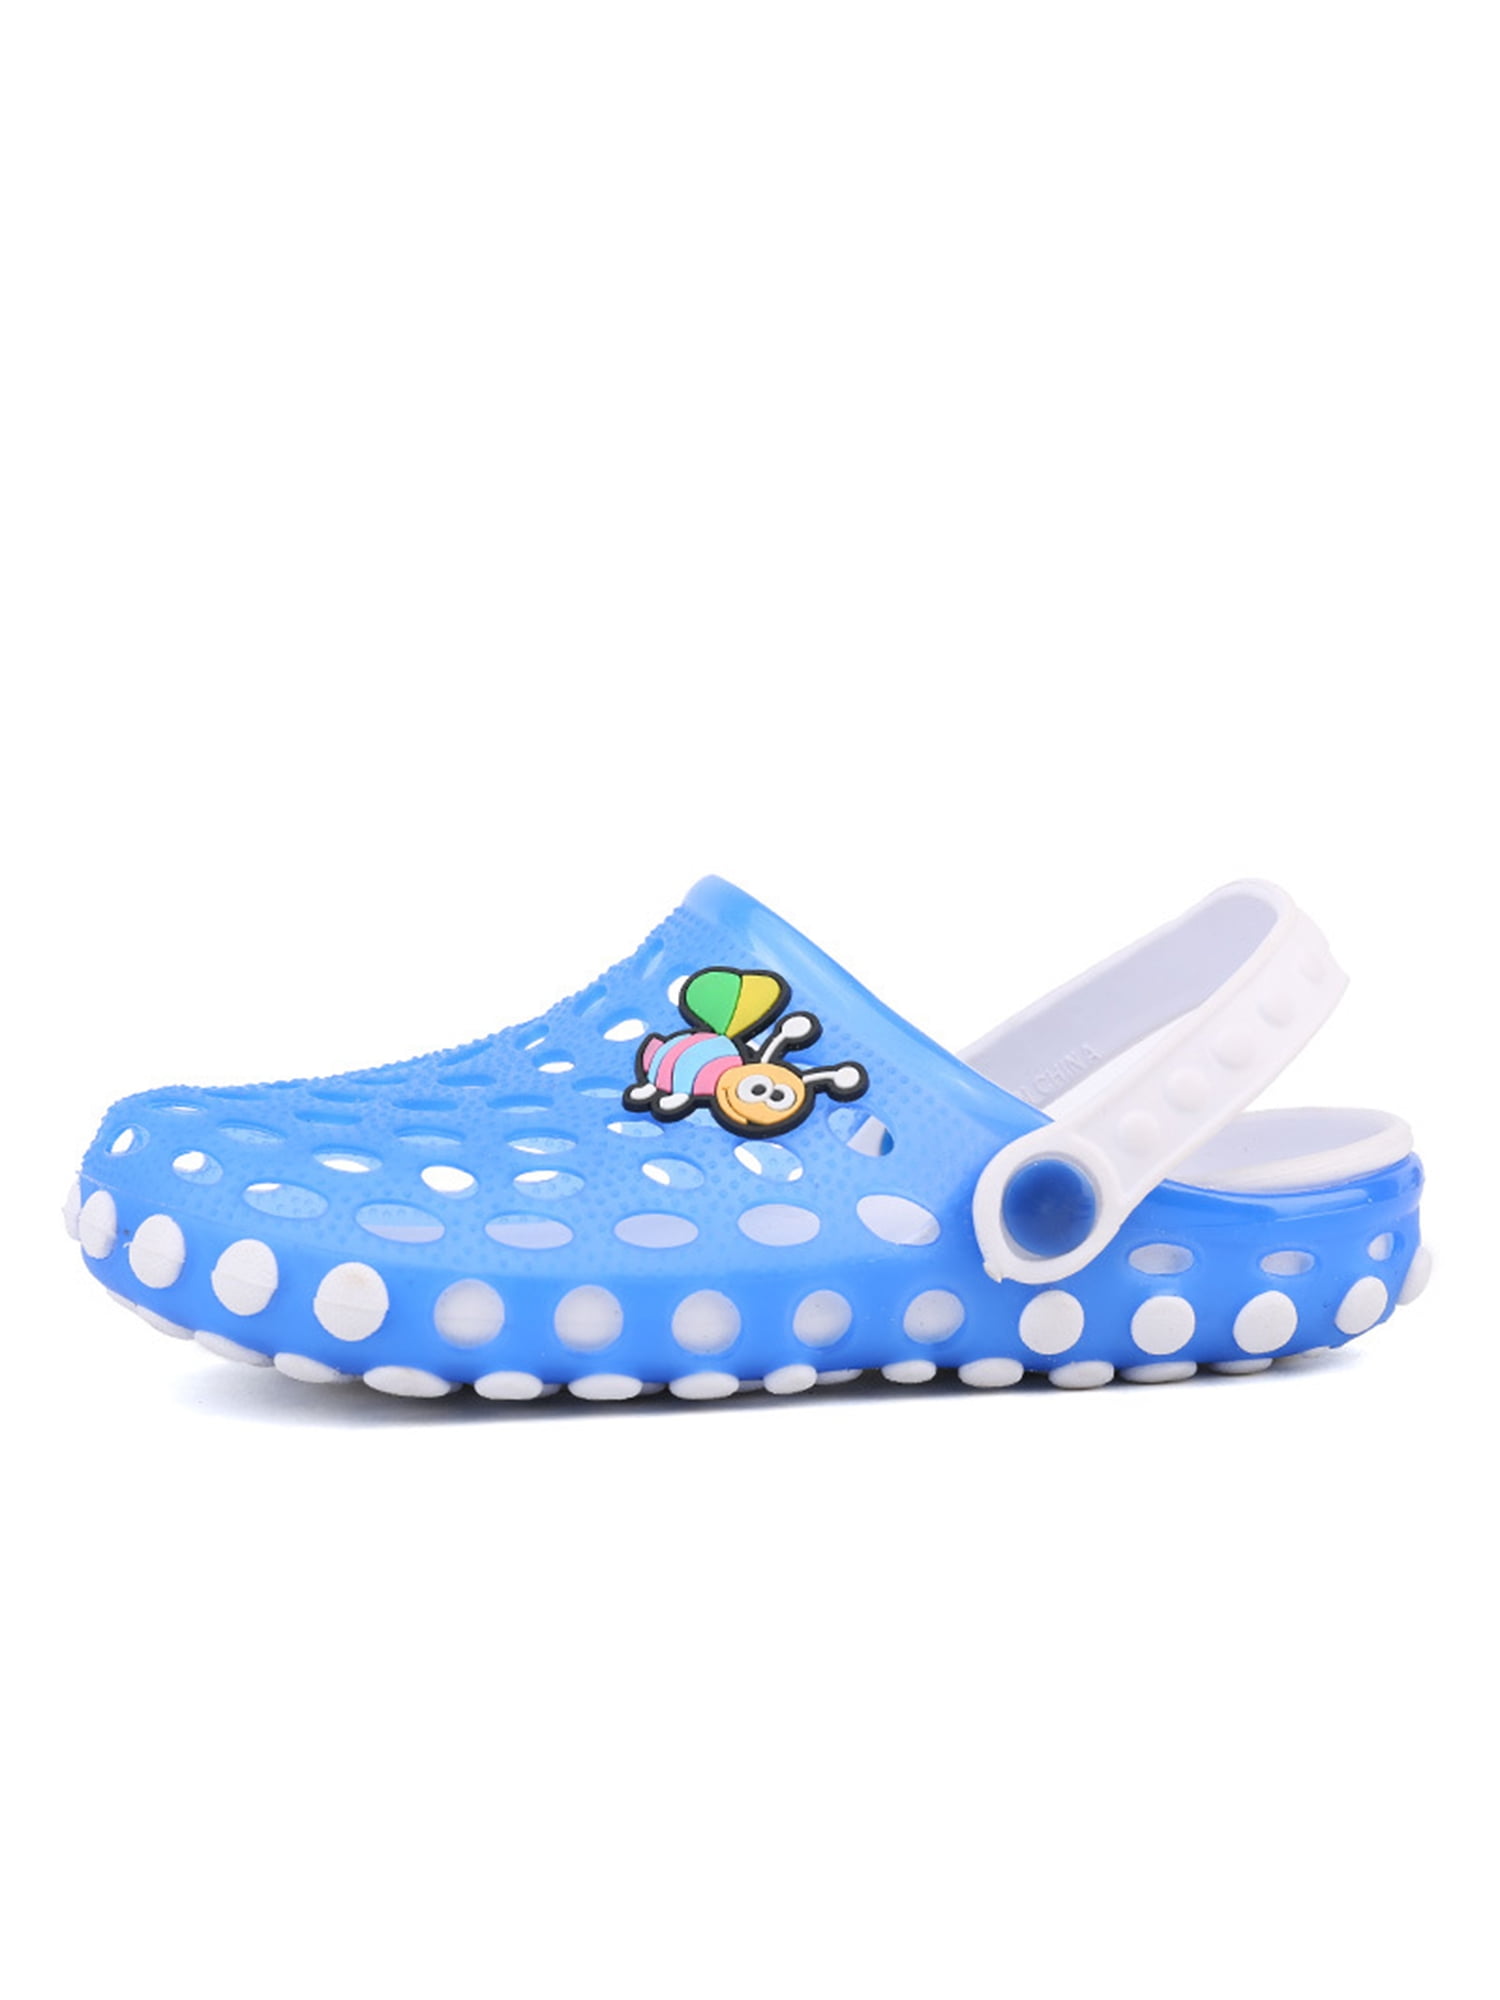 Men's Women Shoes Hollow Breathable Bathing Sandals Pool Barefoot Slip-Ons Water